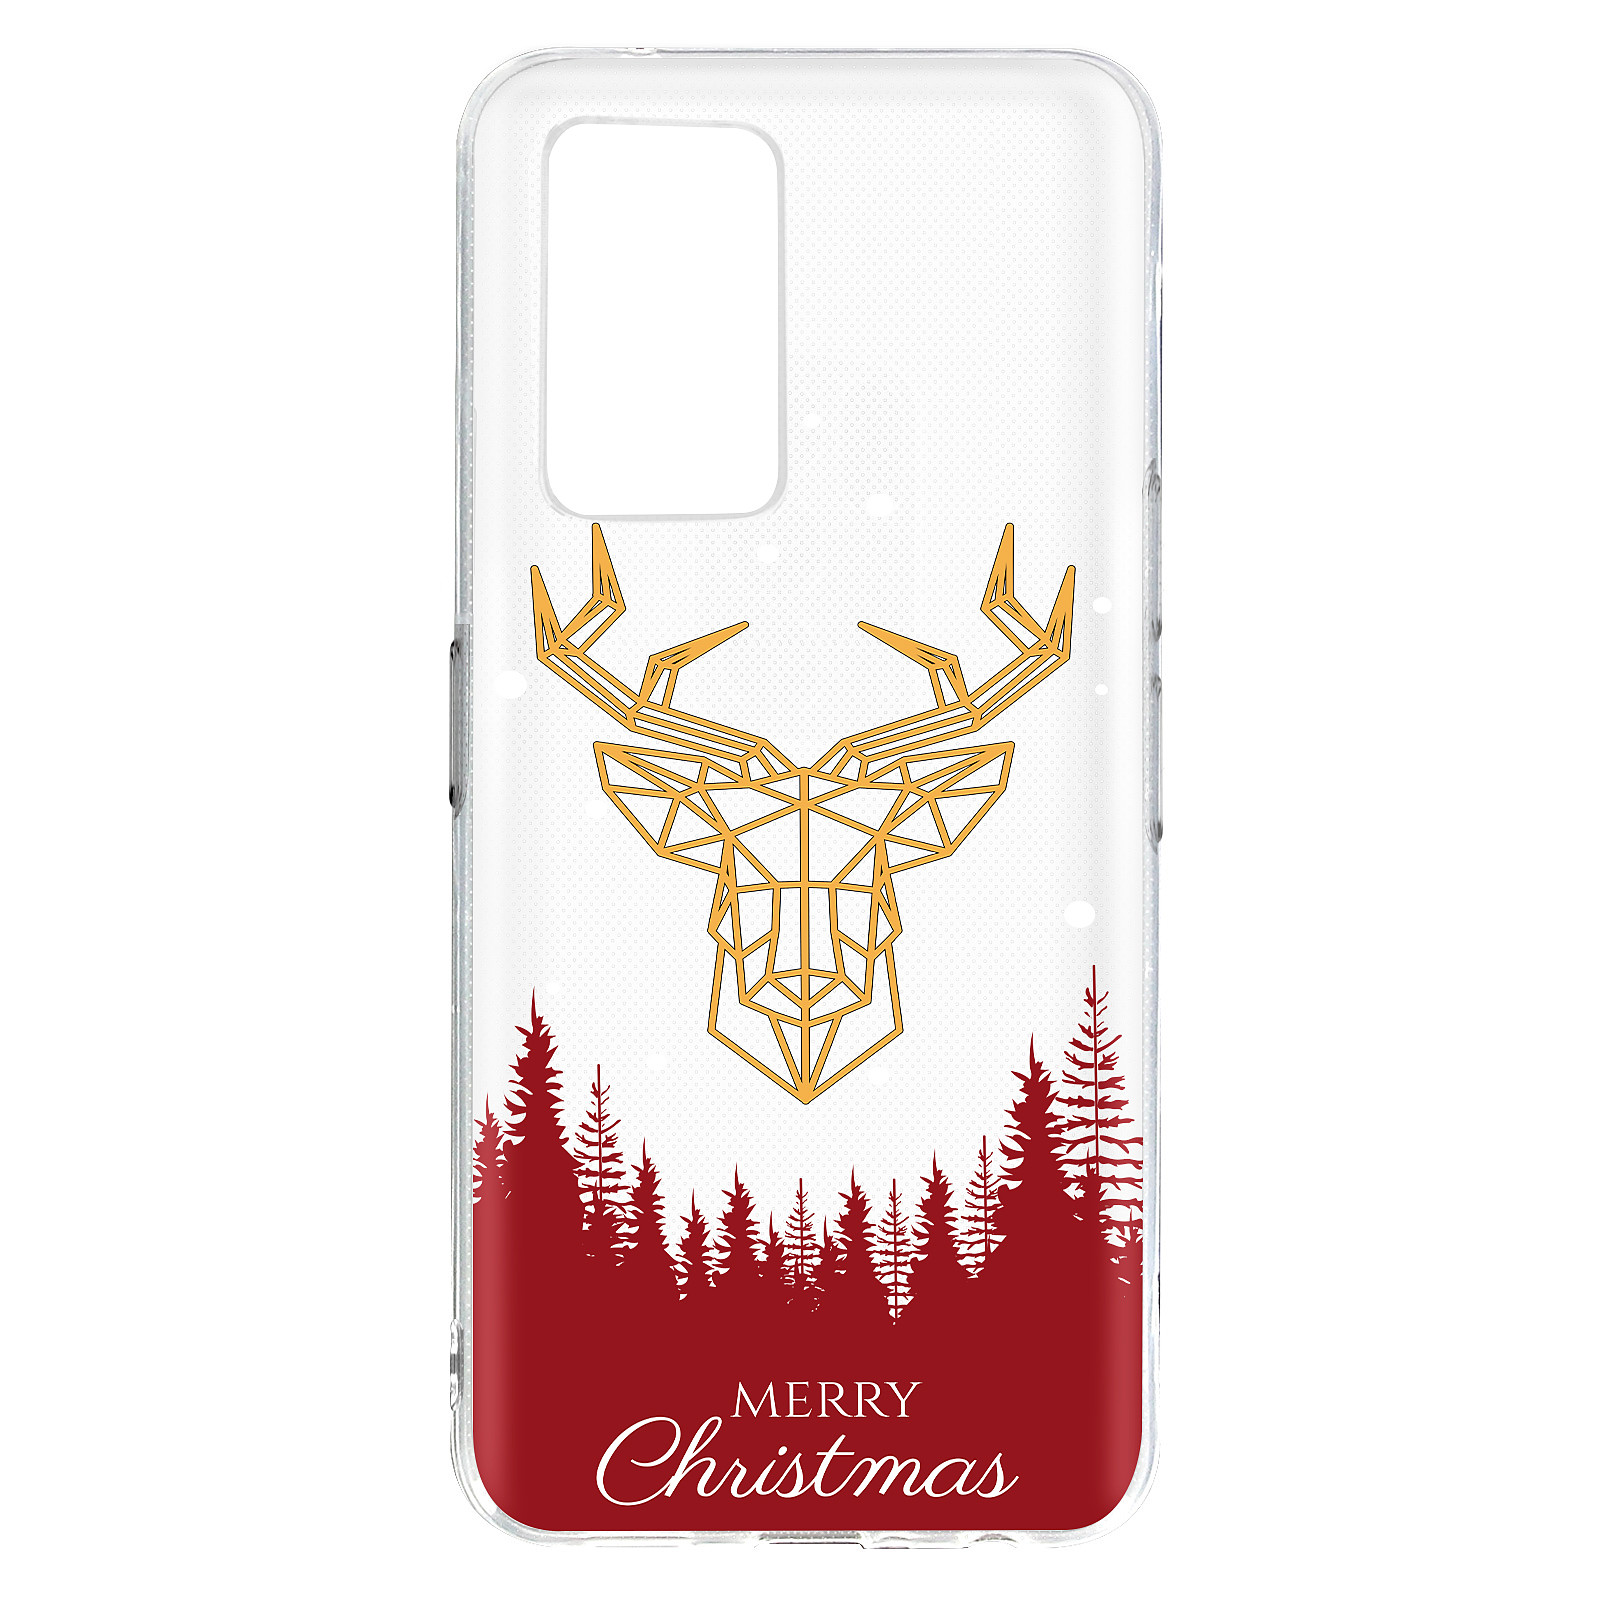 Avizar Coque Cerf Constellation Collection Noel Protection personnalisee - Coque telephone Avizar